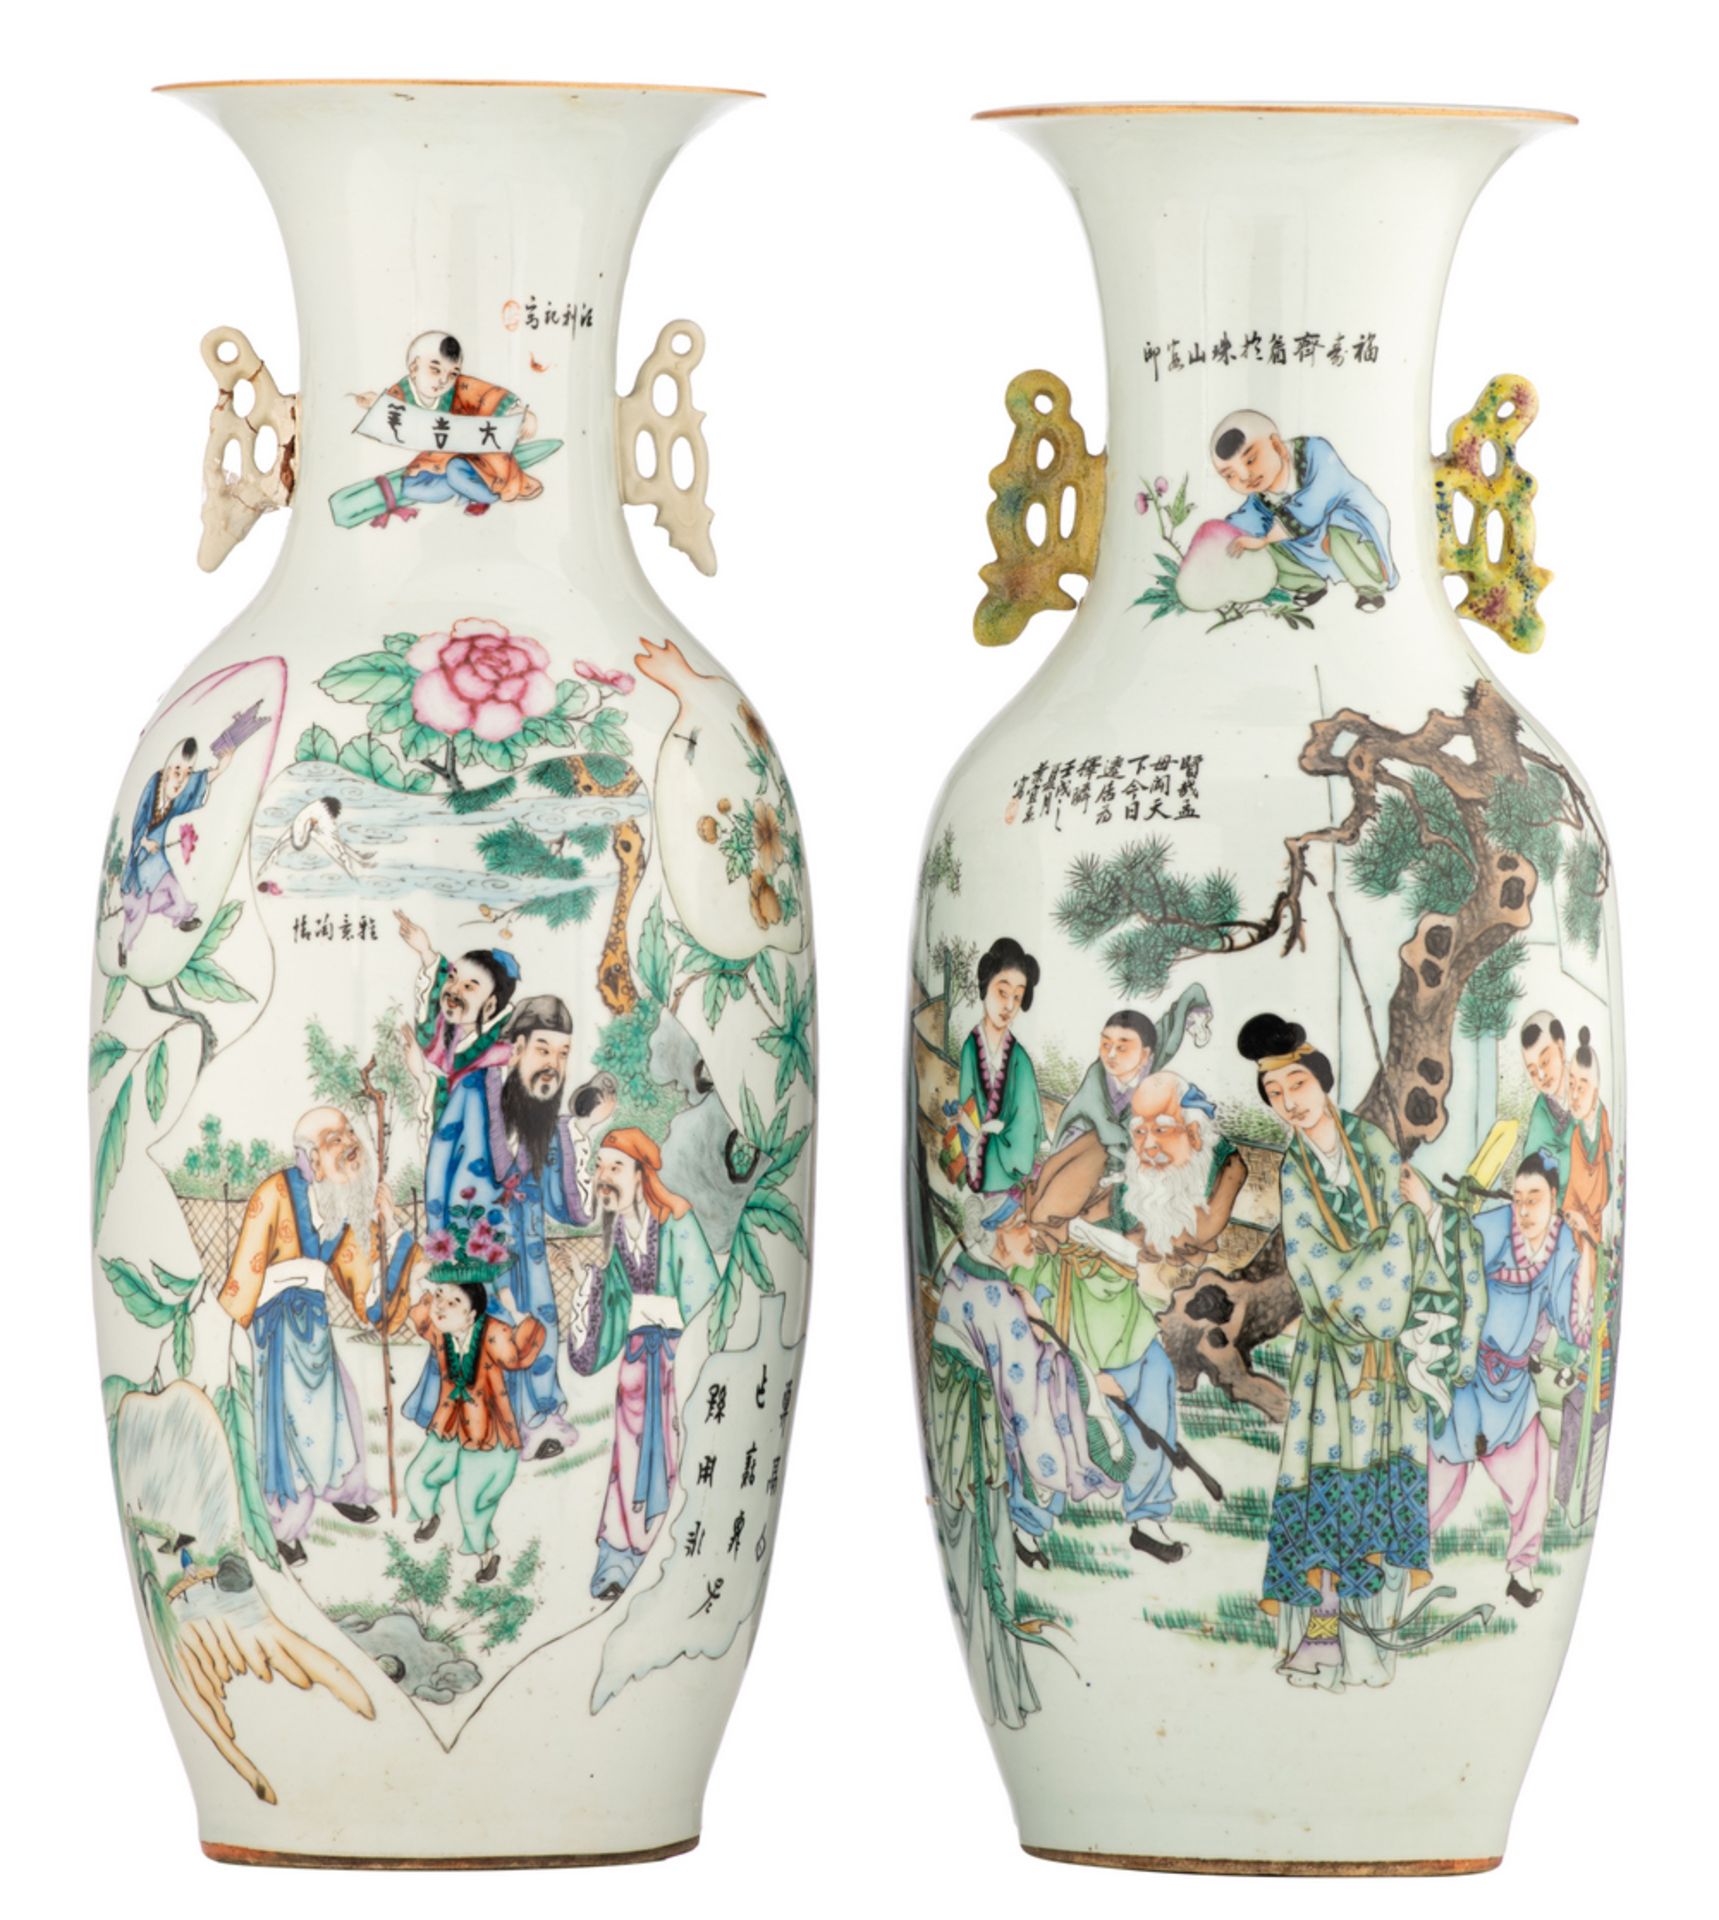 Two Chinese famille rose vases double decorated with animated scenes, one with a peacock and